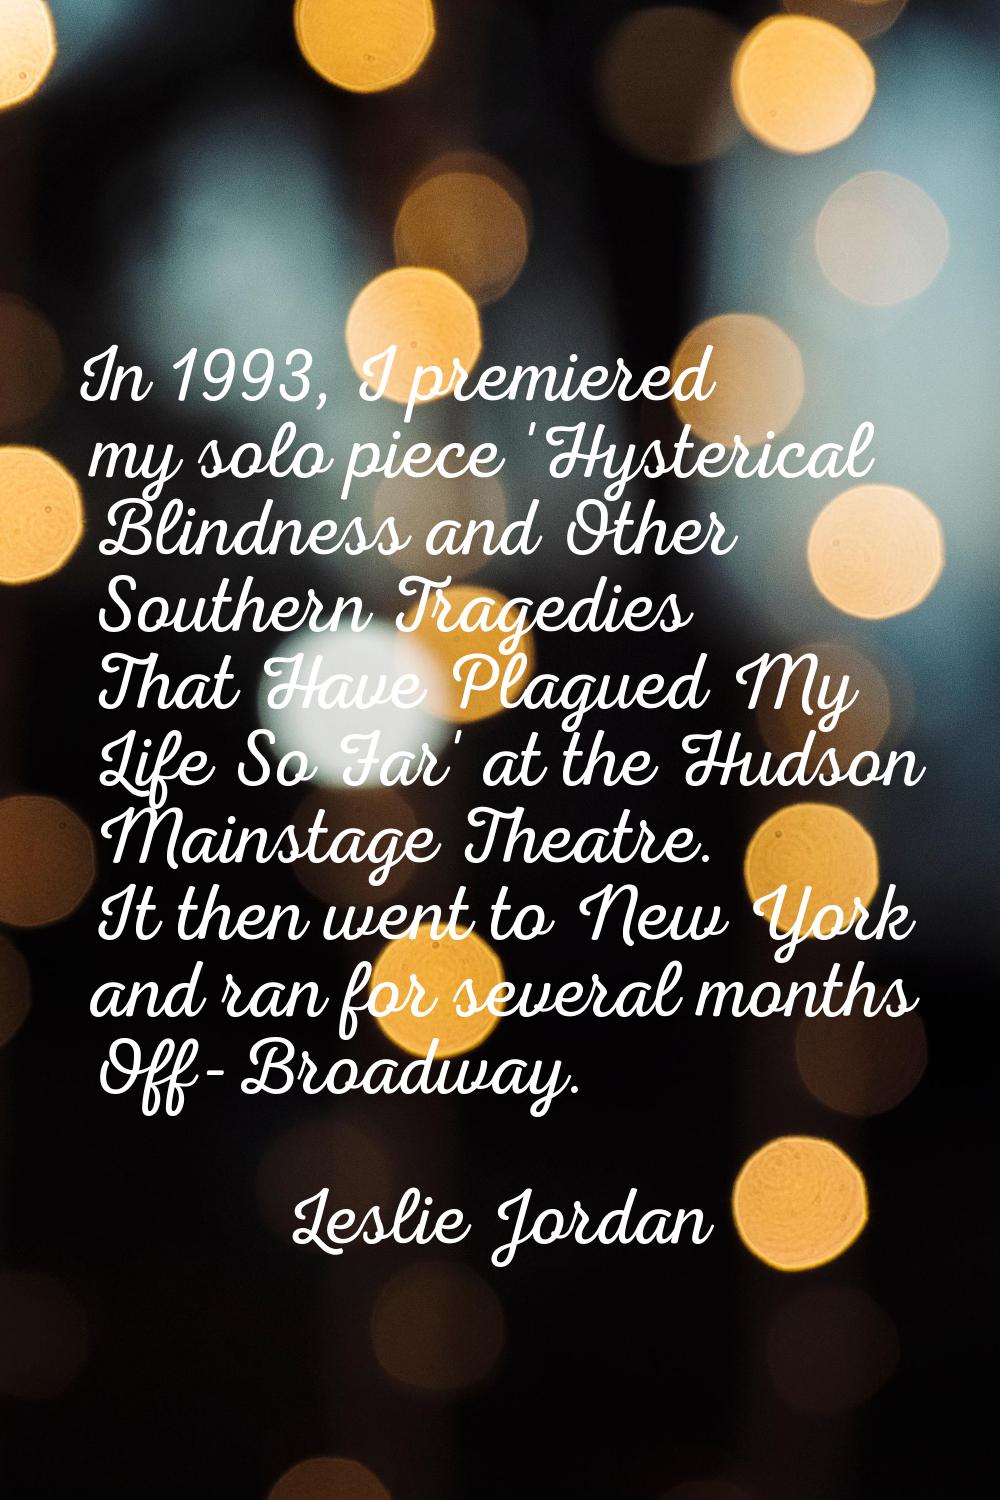 In 1993, I premiered my solo piece 'Hysterical Blindness and Other Southern Tragedies That Have Pla